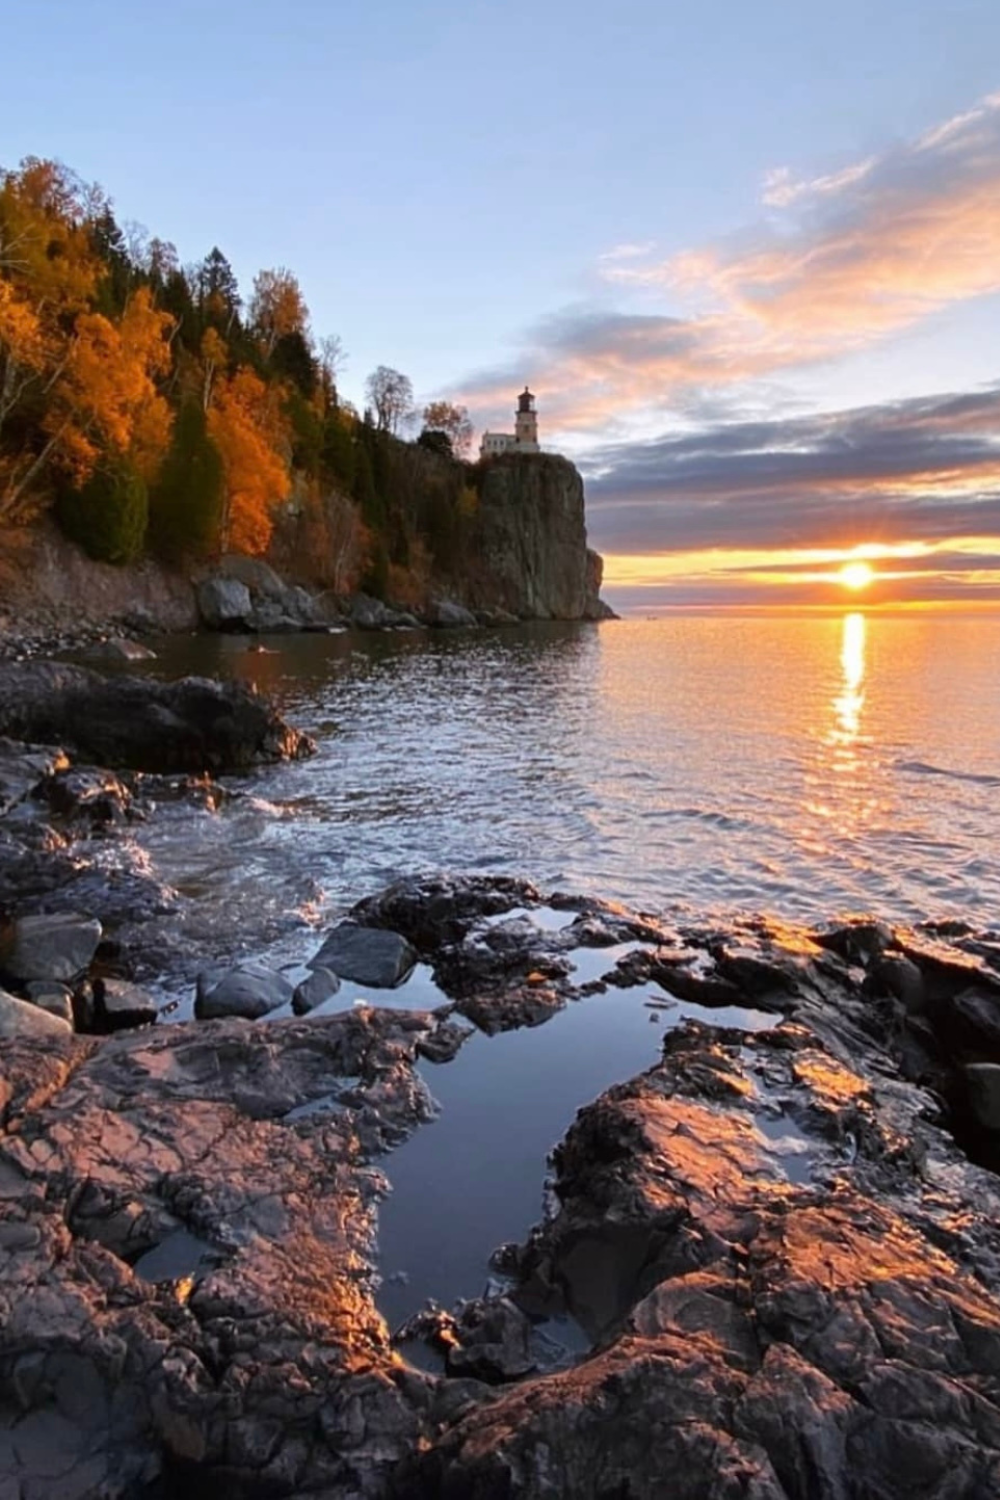 Unveil the digital excellence behind Retreat to Lake Superior in our portfolio. The Agency specializes in creating engaging online experiences and brands that attract and convert. Let's transform your rental next.